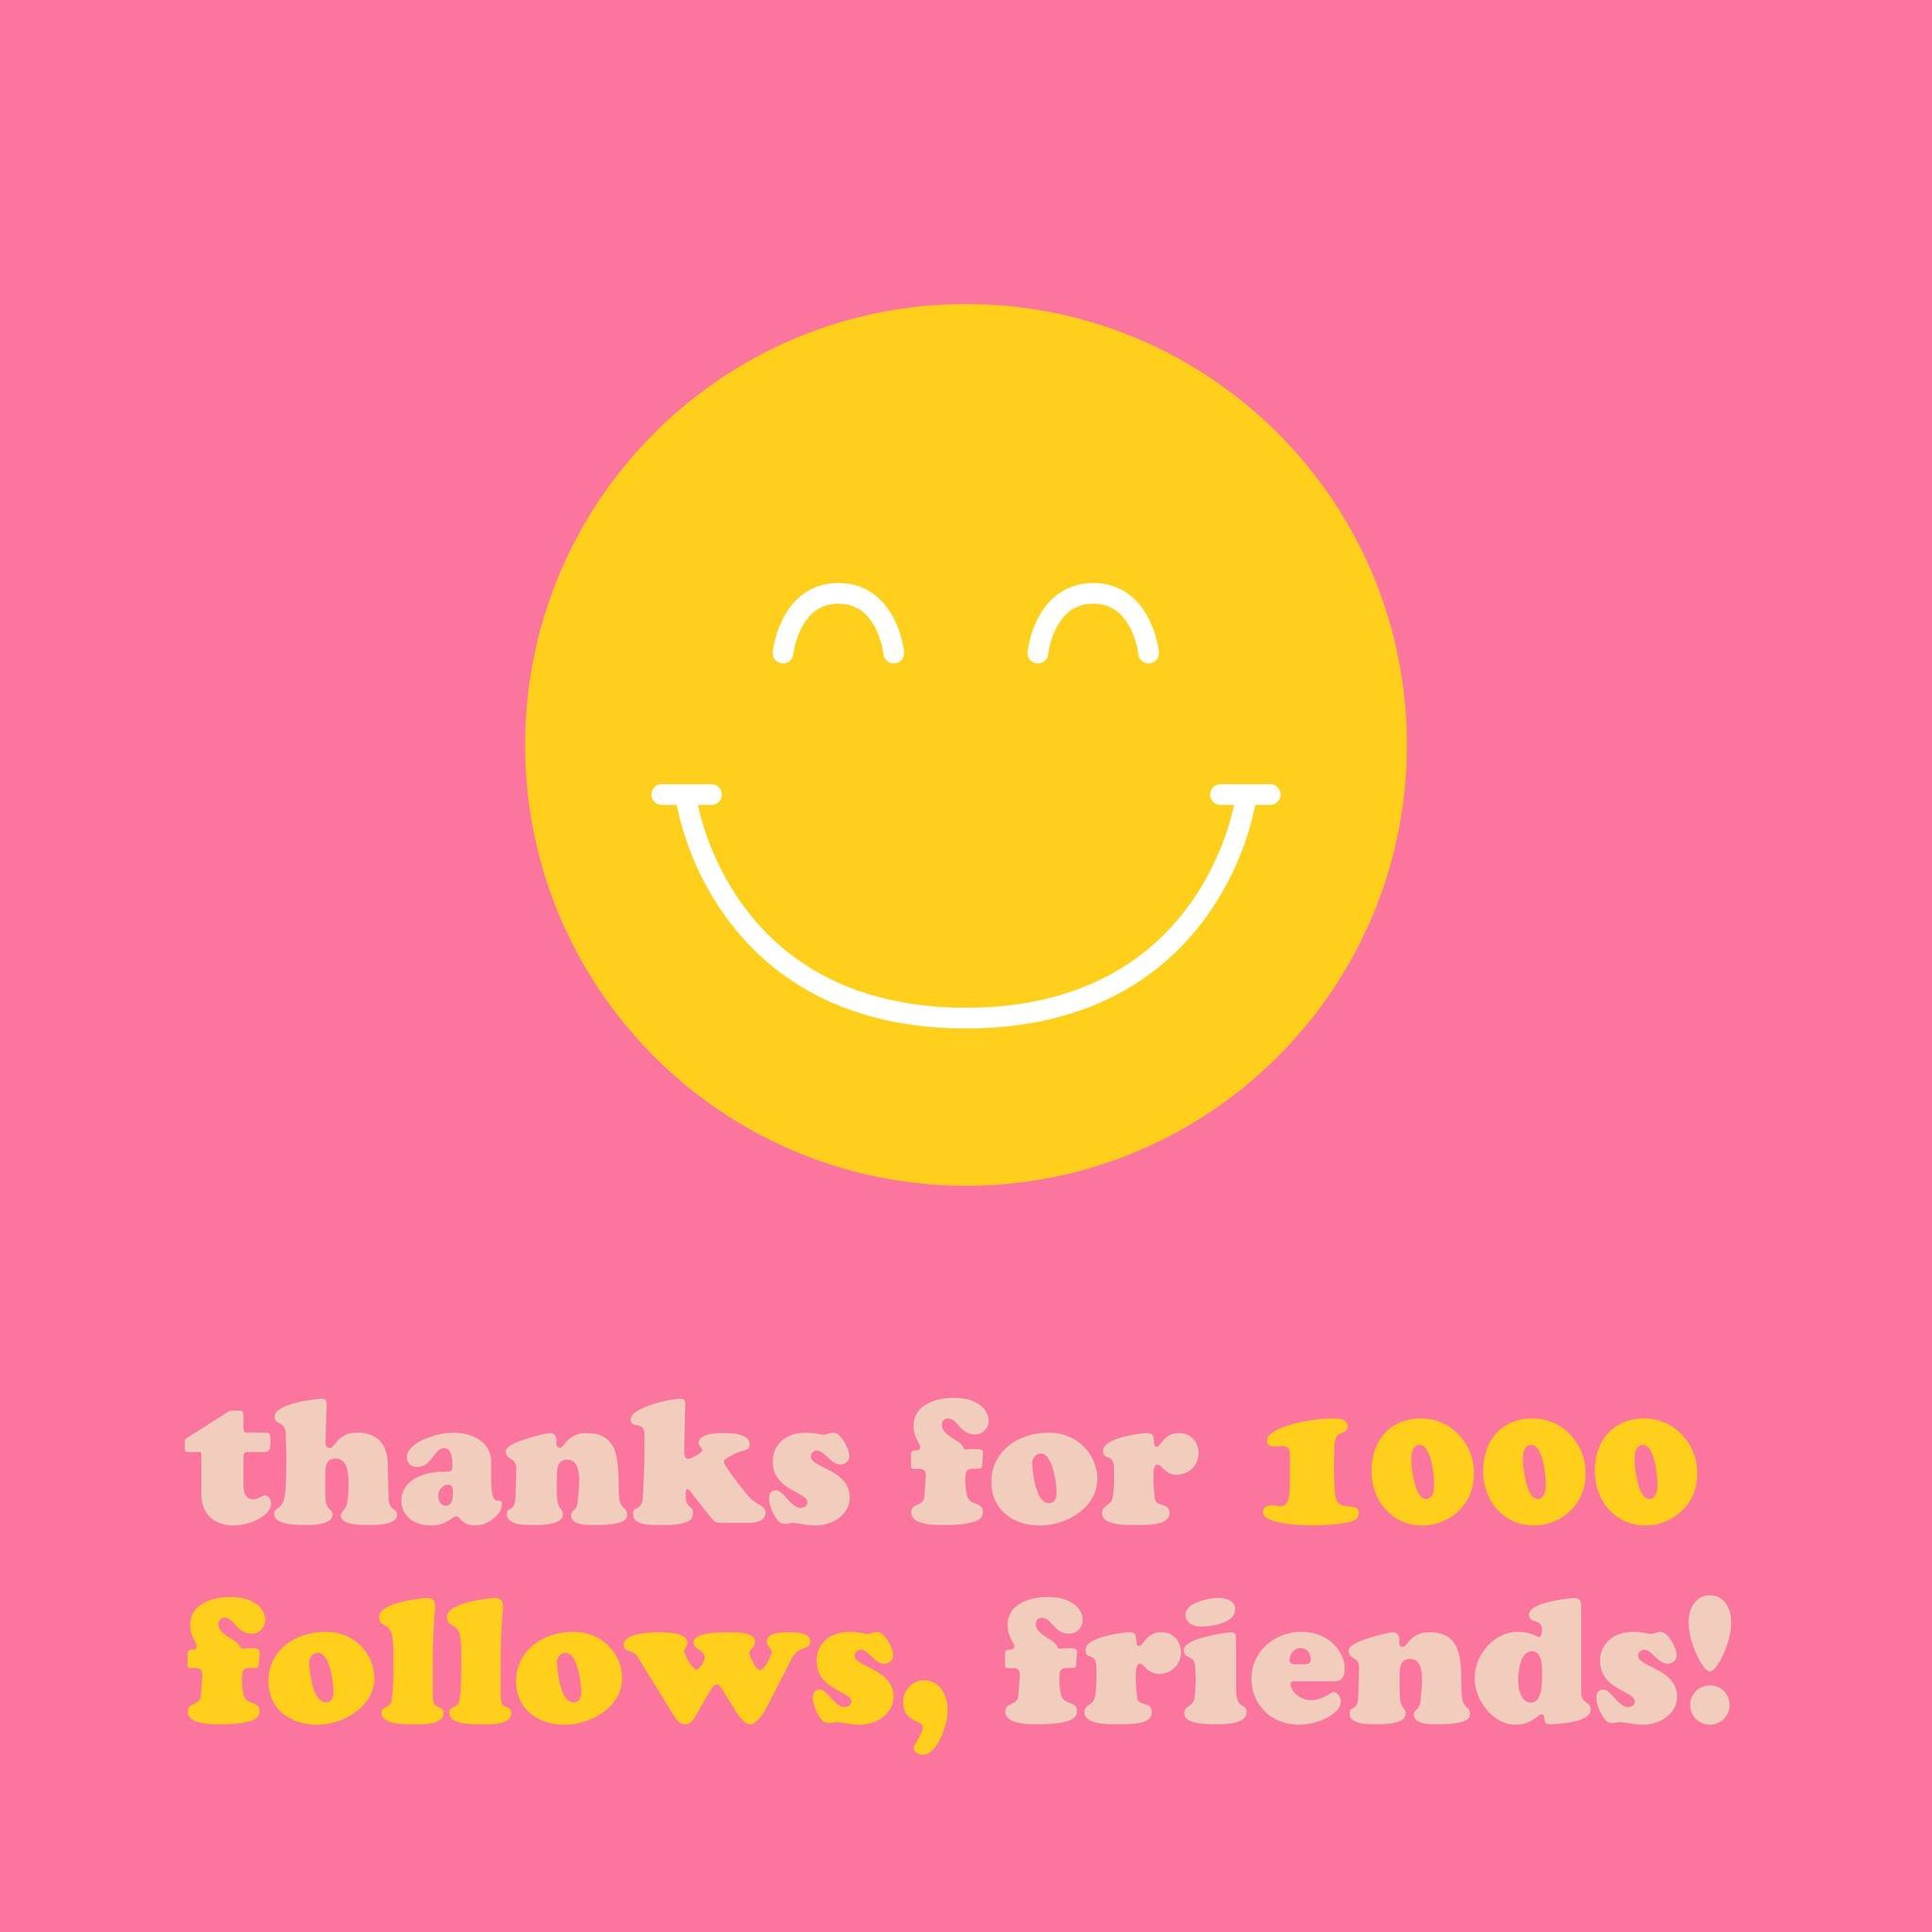 Thanks for 1000 follows, friends! We couldn't do this without you. If you haven't had a chance to try our soda yet, come see us at the Edmond Farmers Market today. We're here 'til 1. Then, we'll be at Heard on Hurd in downtown Edmond TONIGHT!
-
Happy